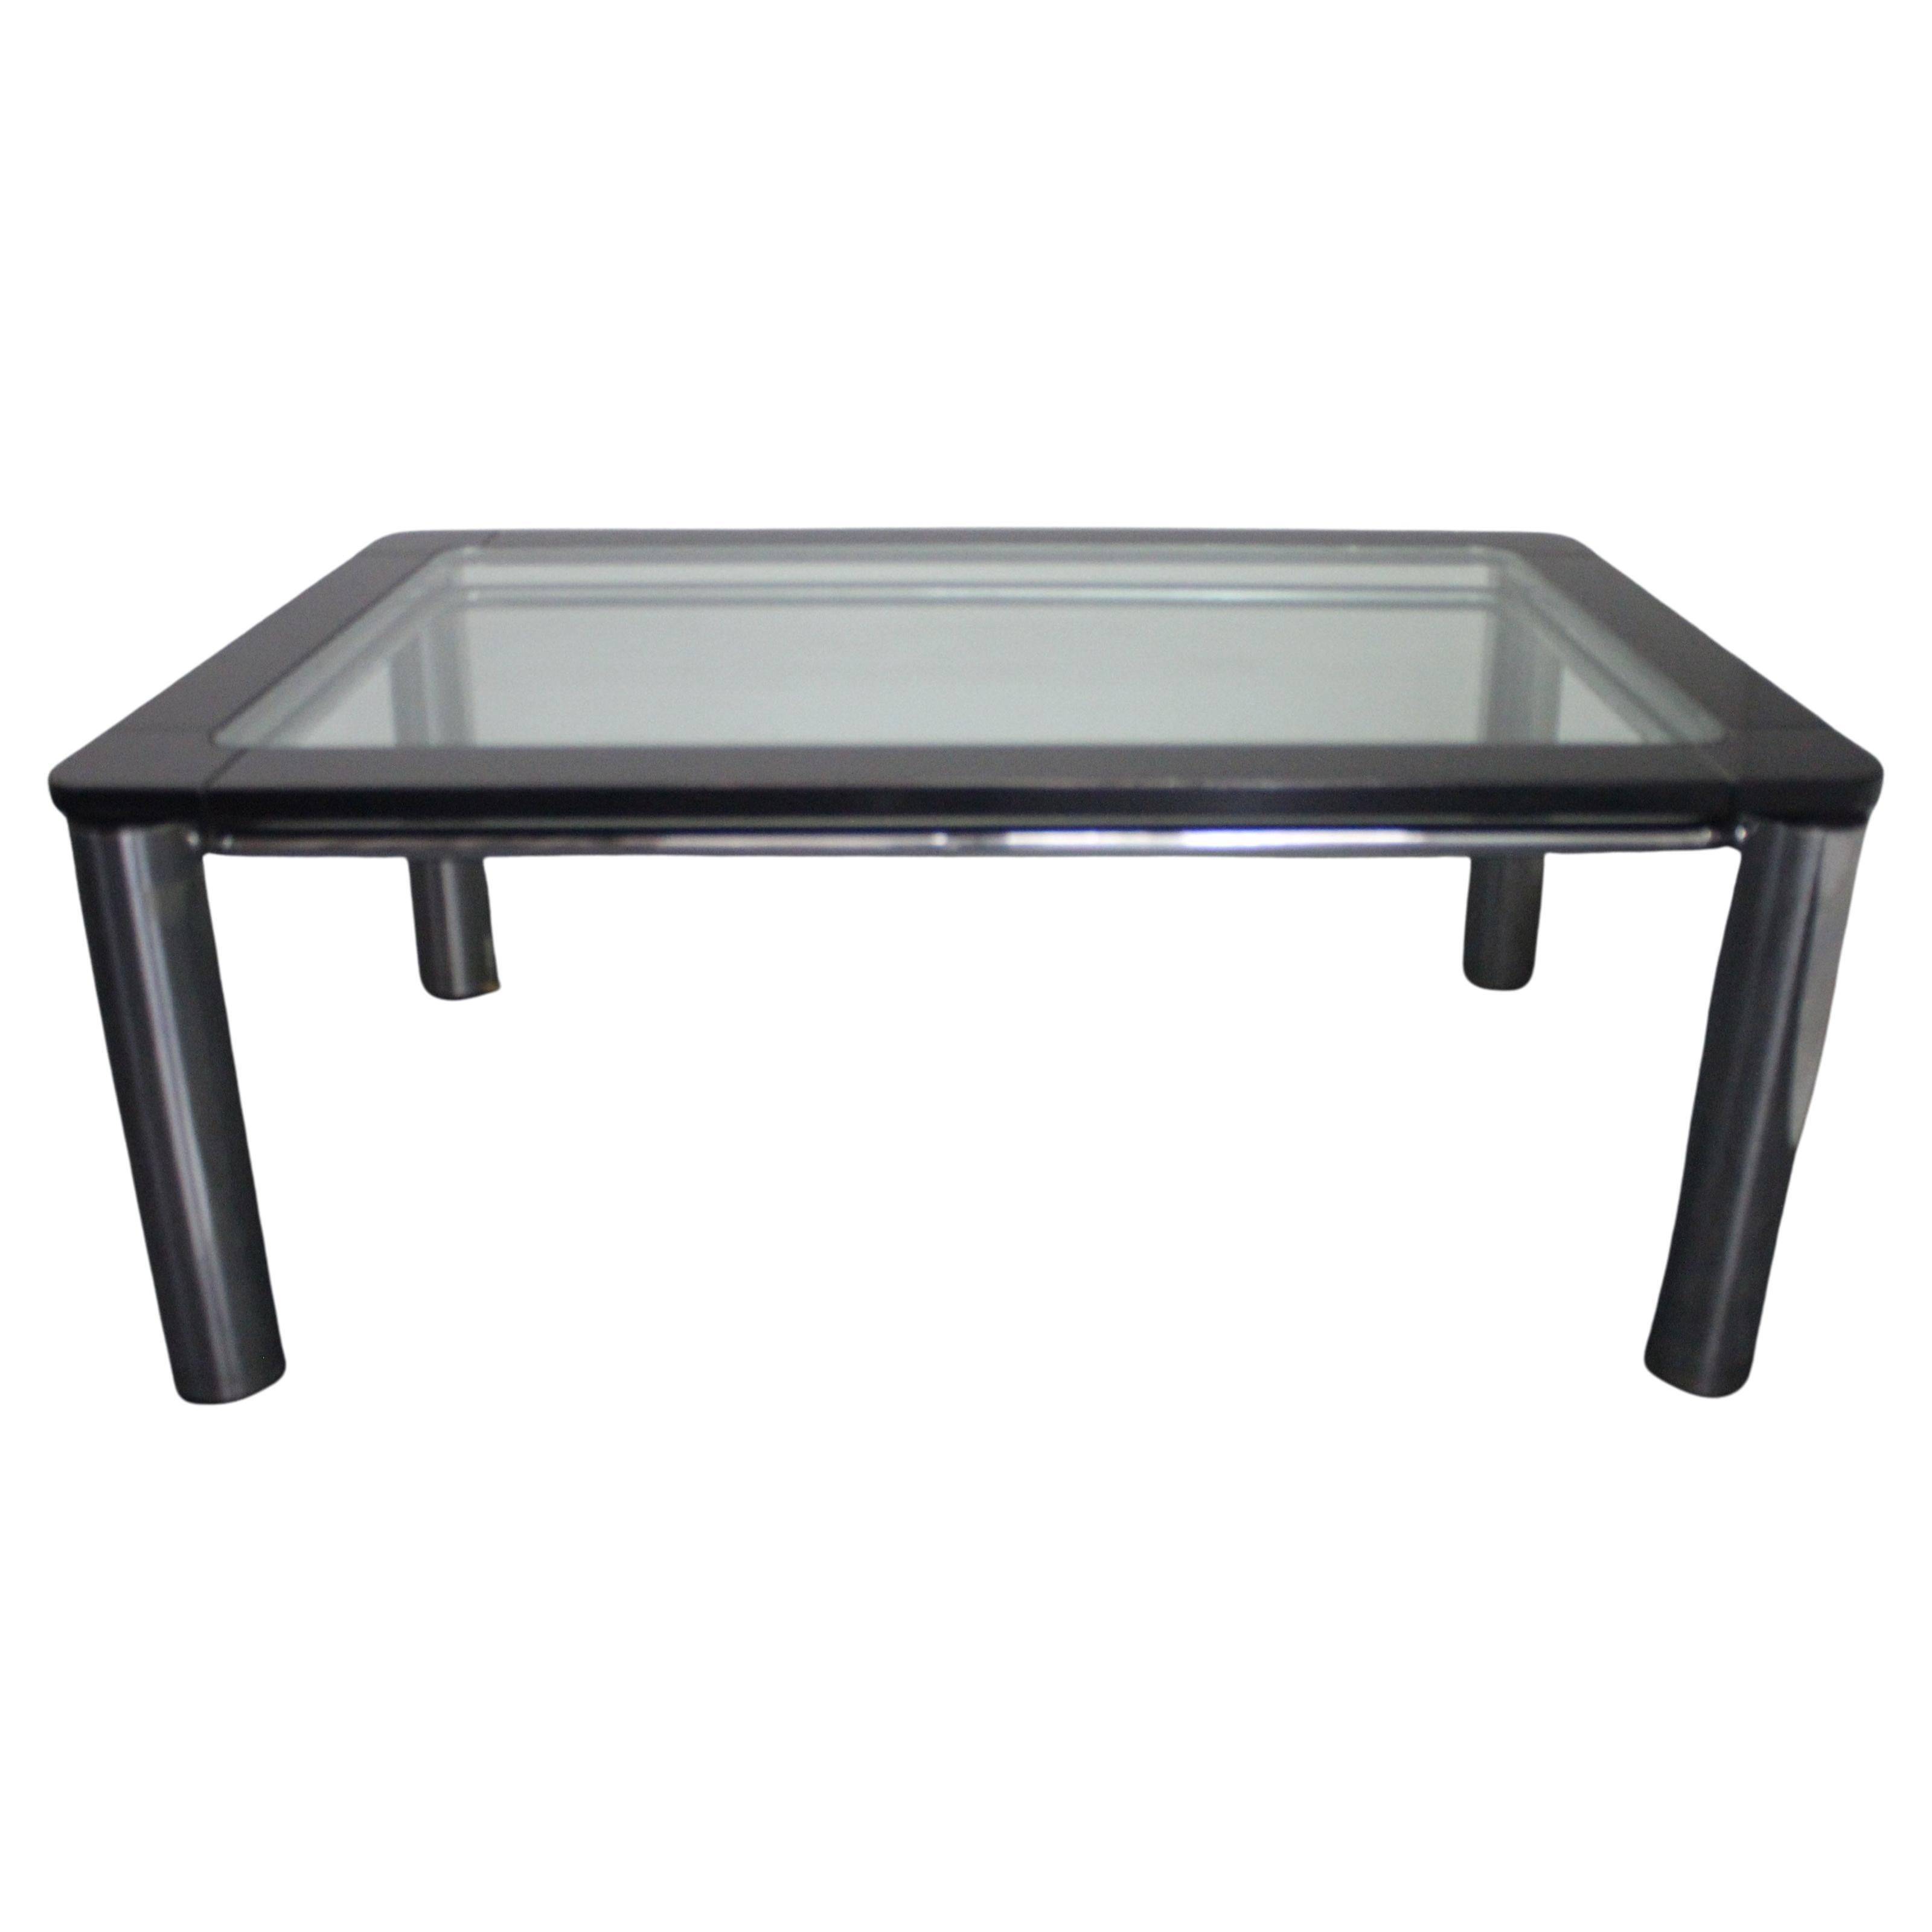 Black Lacquer Wood, Steel, and Glass Dining Table by Marco Zanuso for Zanotta For Sale